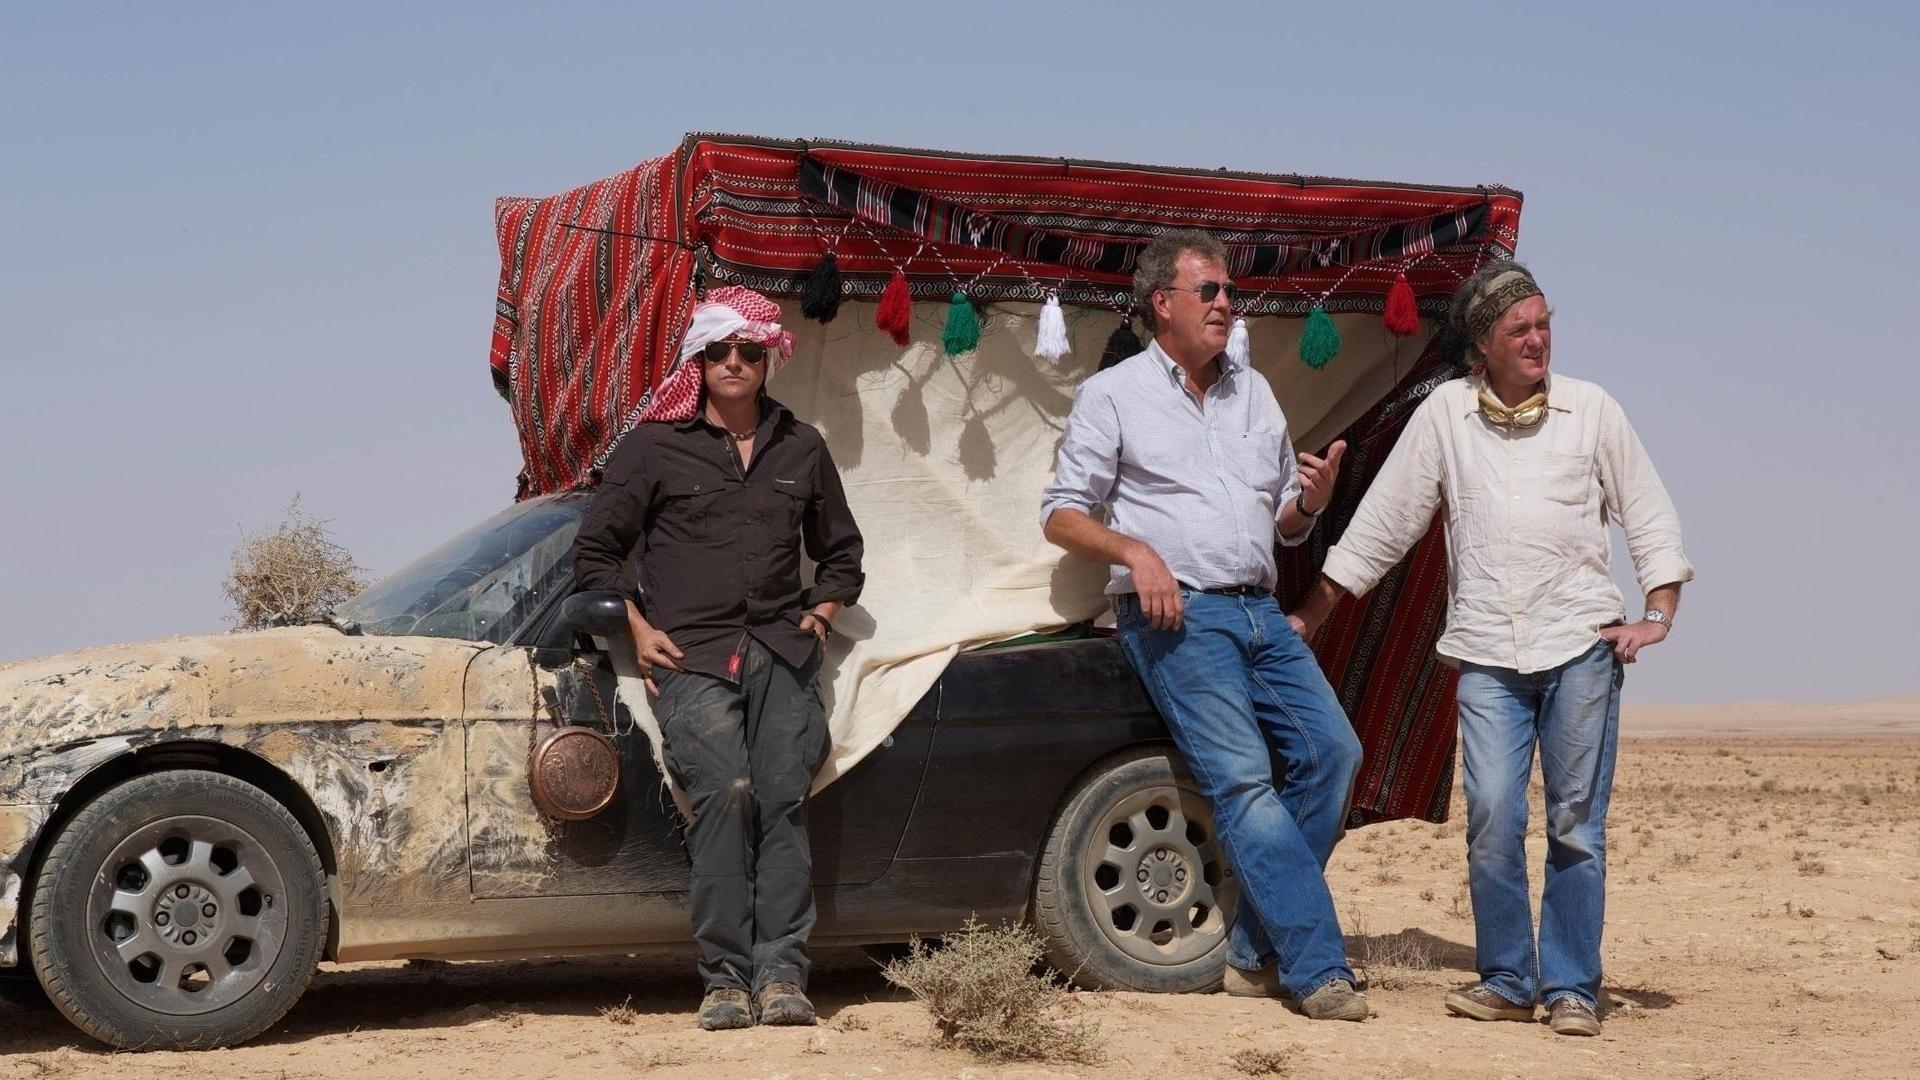 Top Gear: Middle East Special backdrop